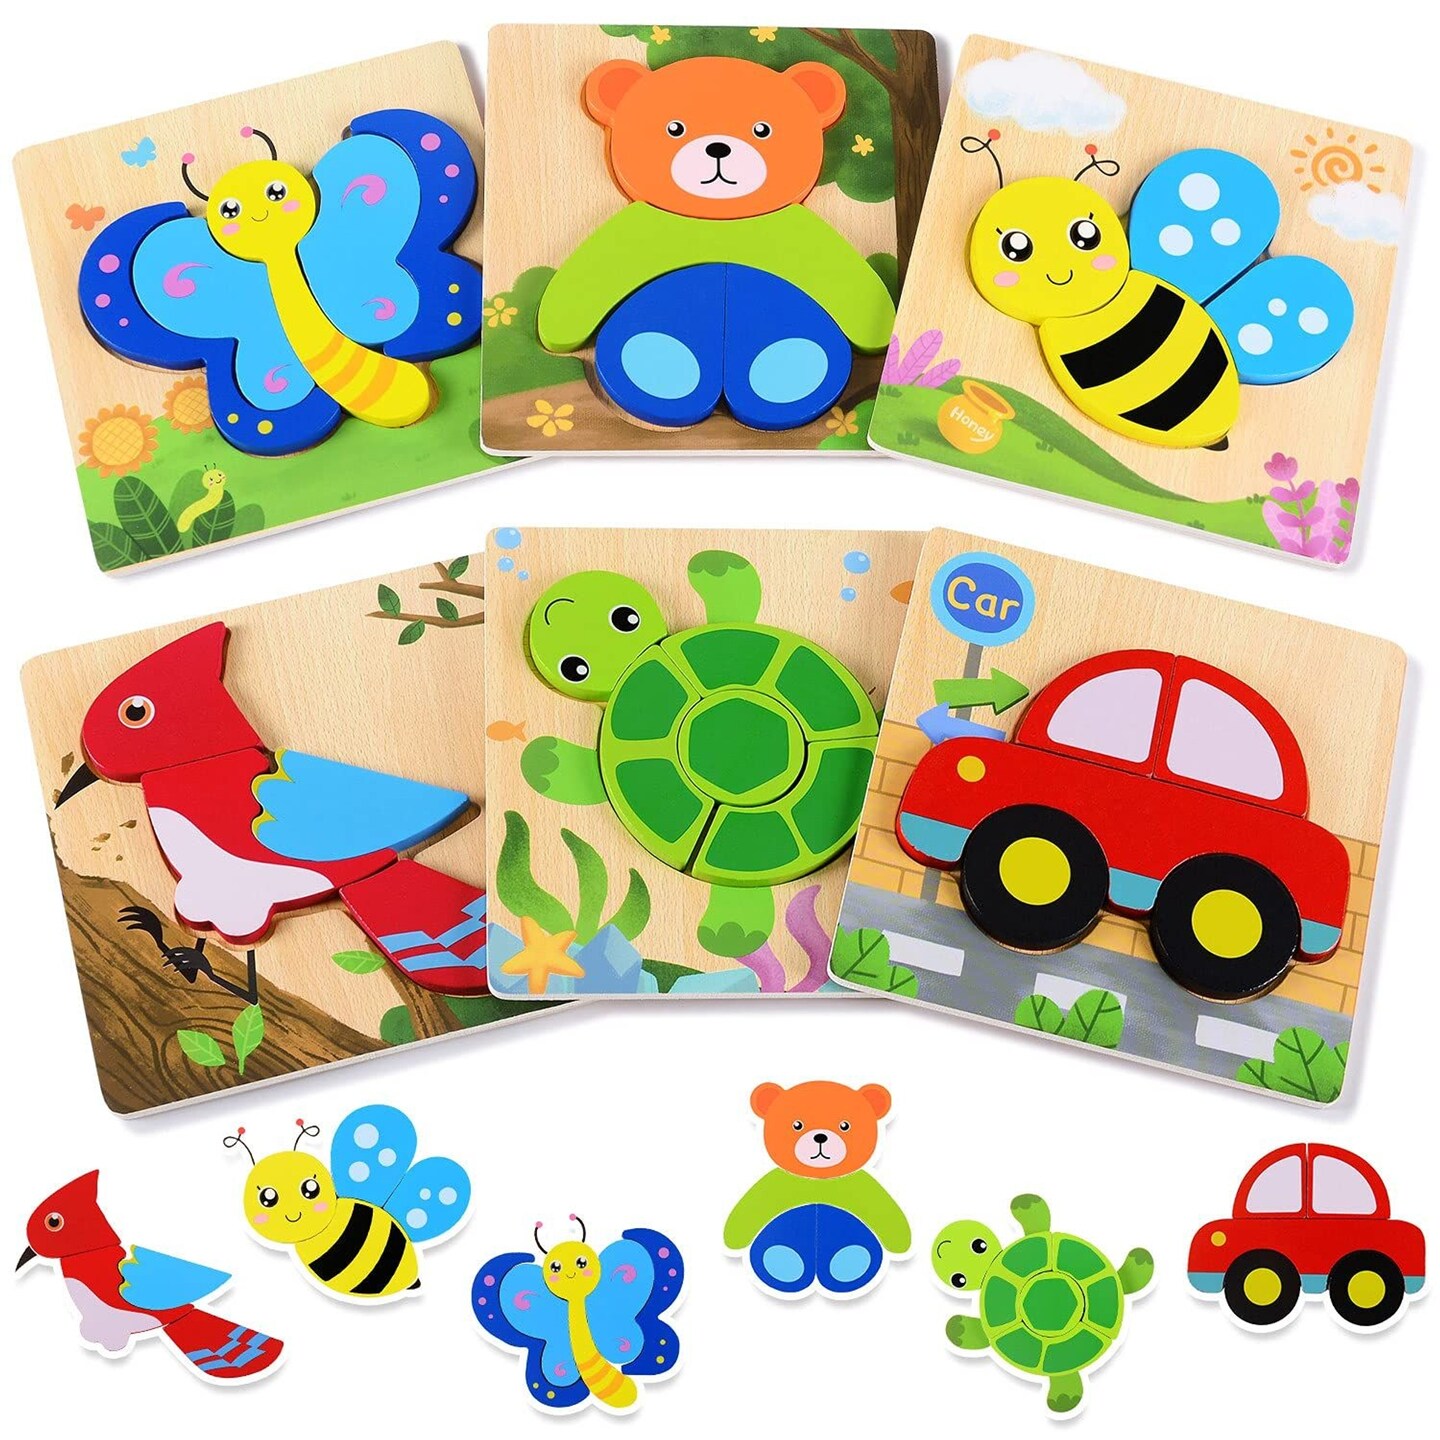 Magifire Wooden Puzzles for Toddlers 1-3, Set of 6 Montessori Puzzles for 1 Year Old, Toddler Puzzles, Baby Puzzles Wooden Toys, Includes Storage Bag and Giftable Box